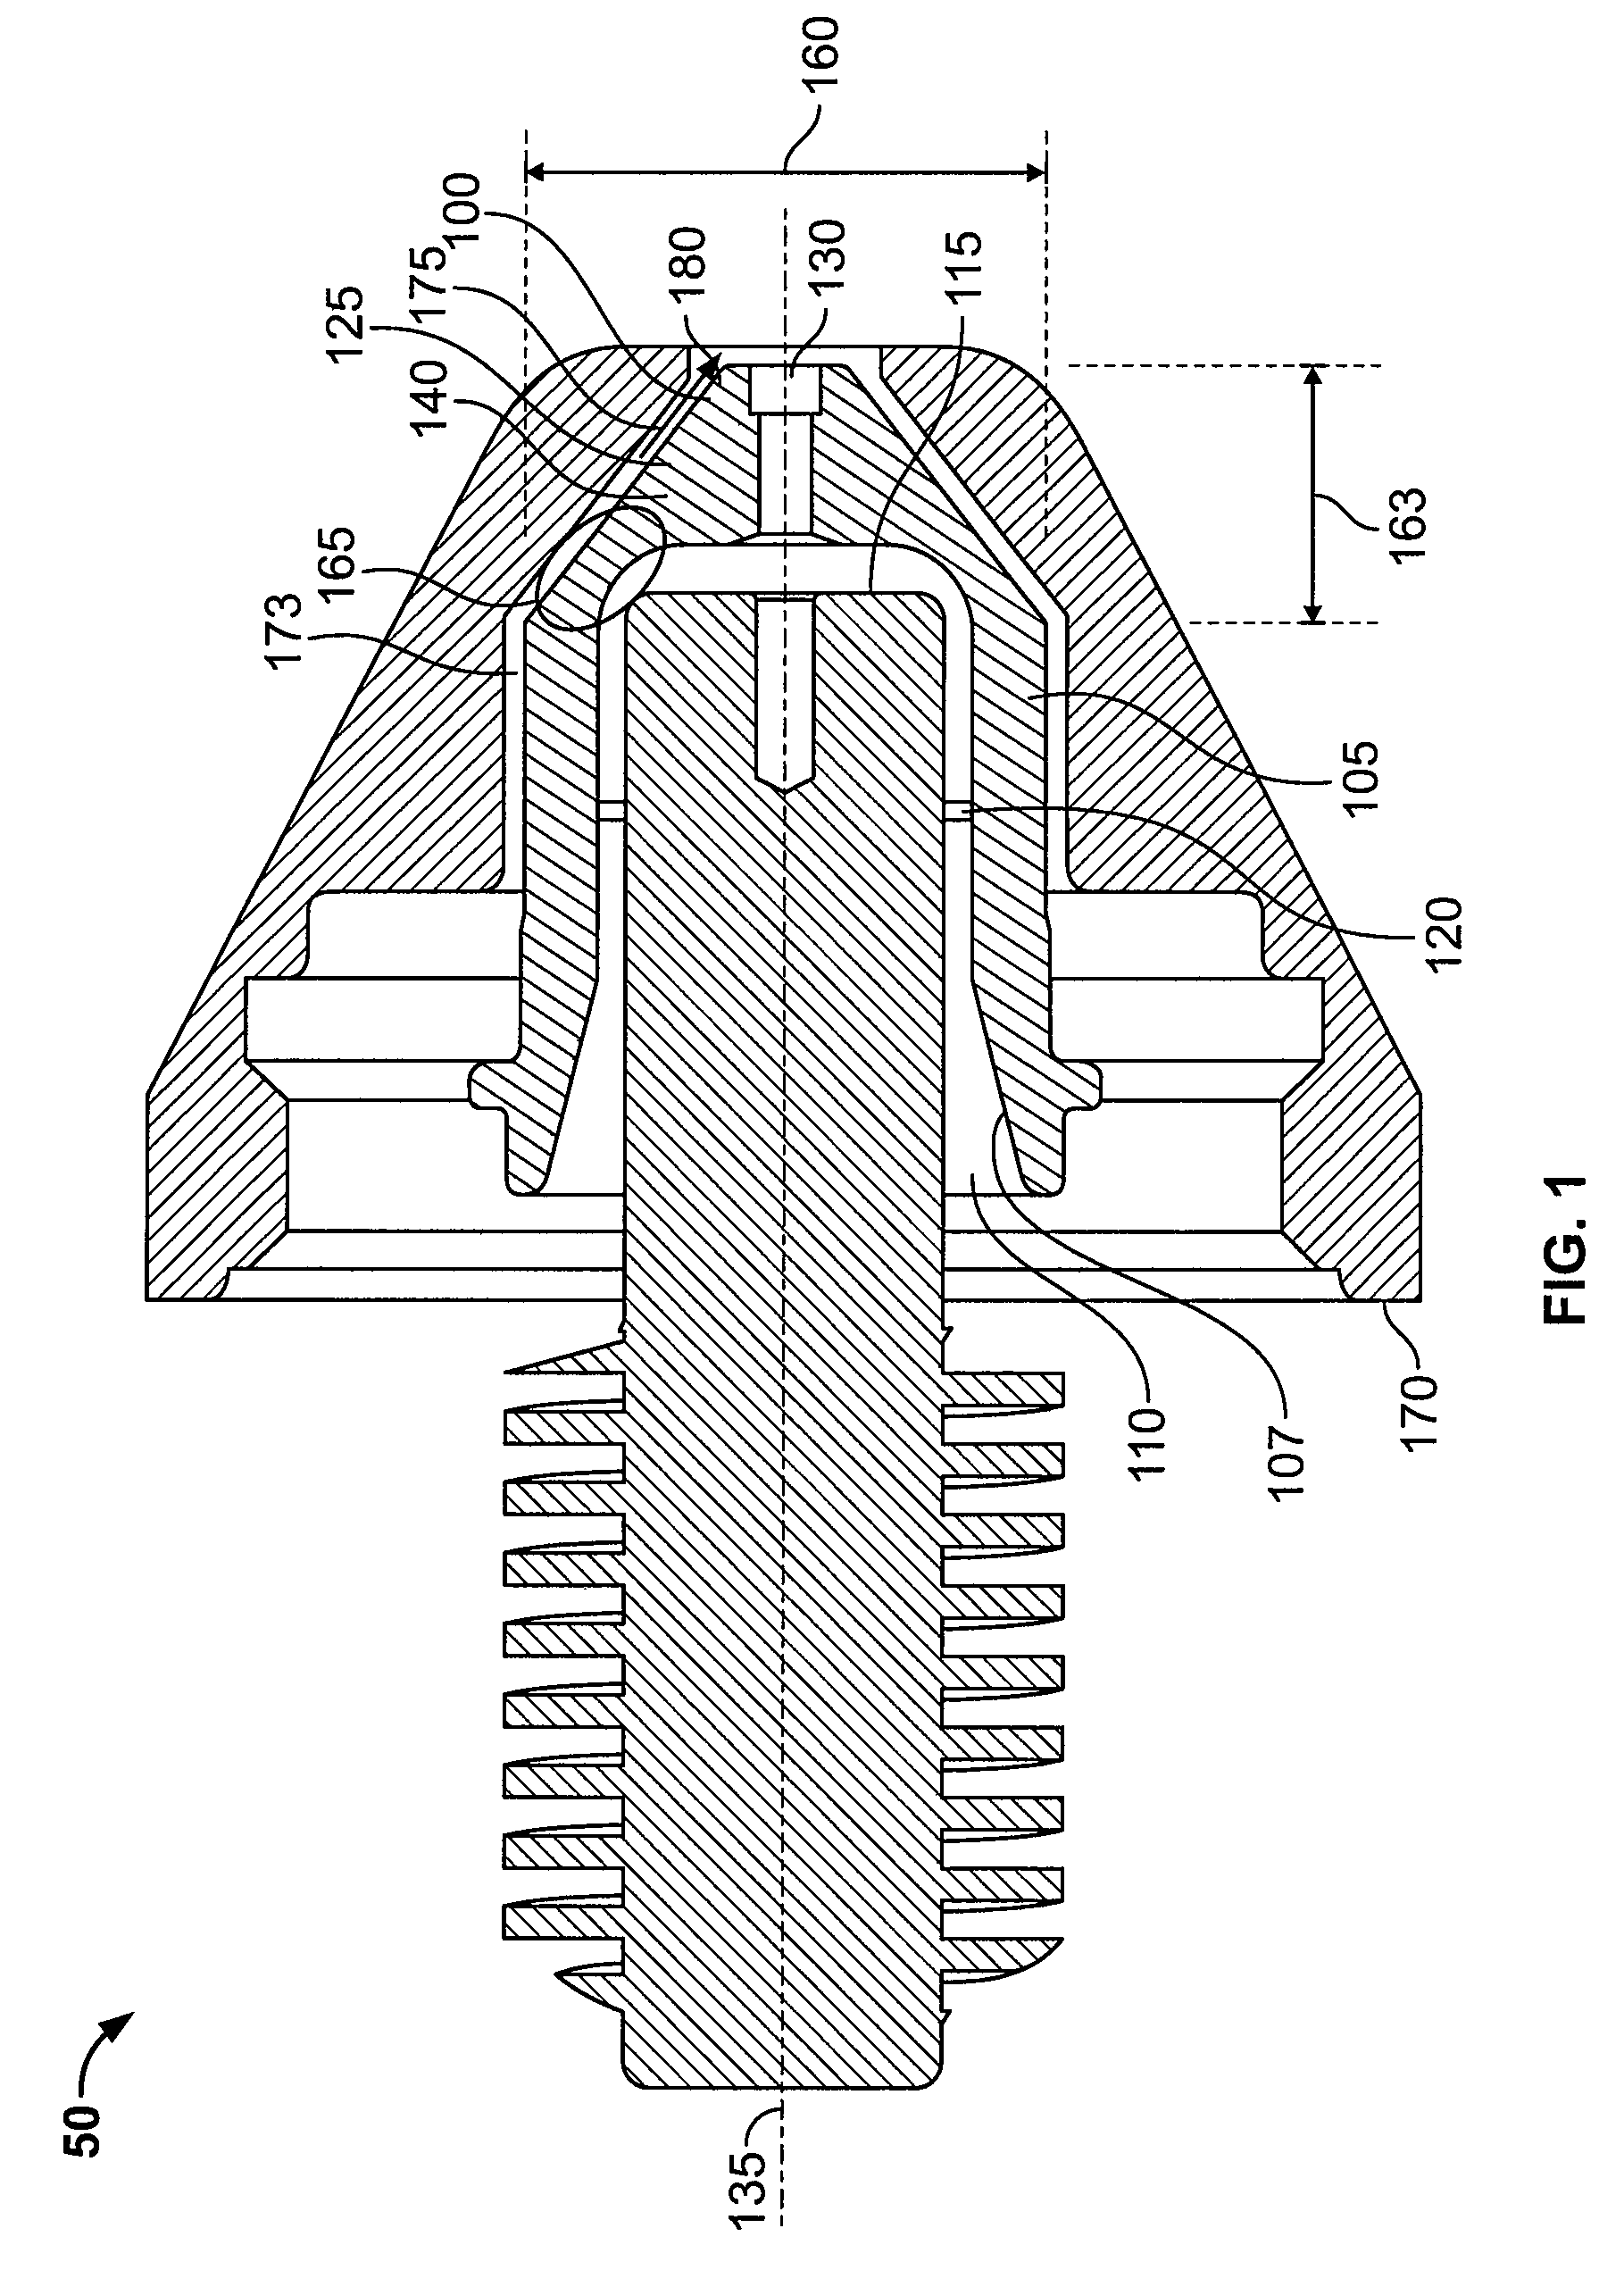 Nozzle head with increased shoulder thickness